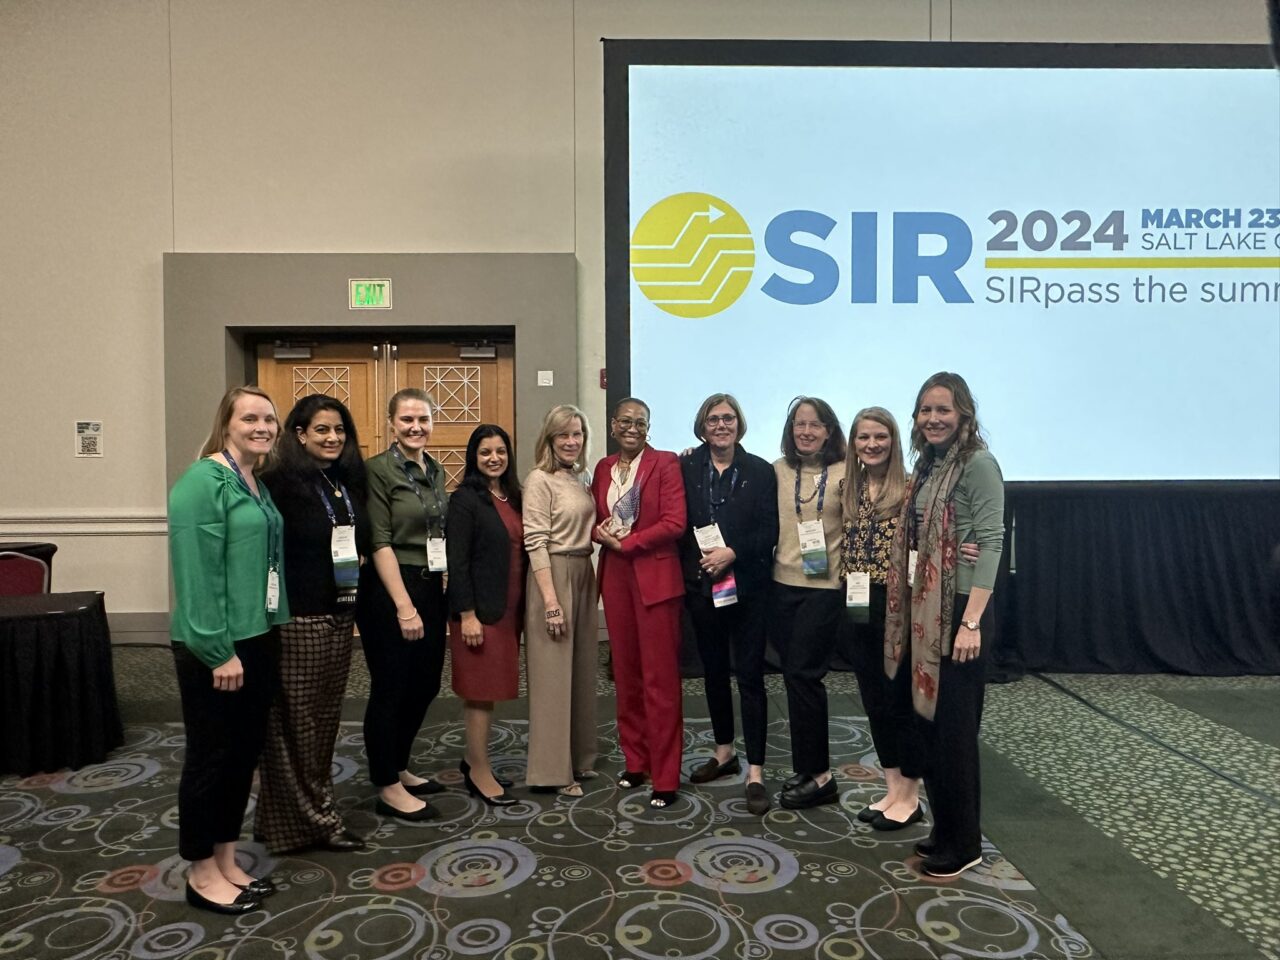 Shikha Jain: A whirlwind trip to Salt Lake City for the Society of Interventional Radiology conference